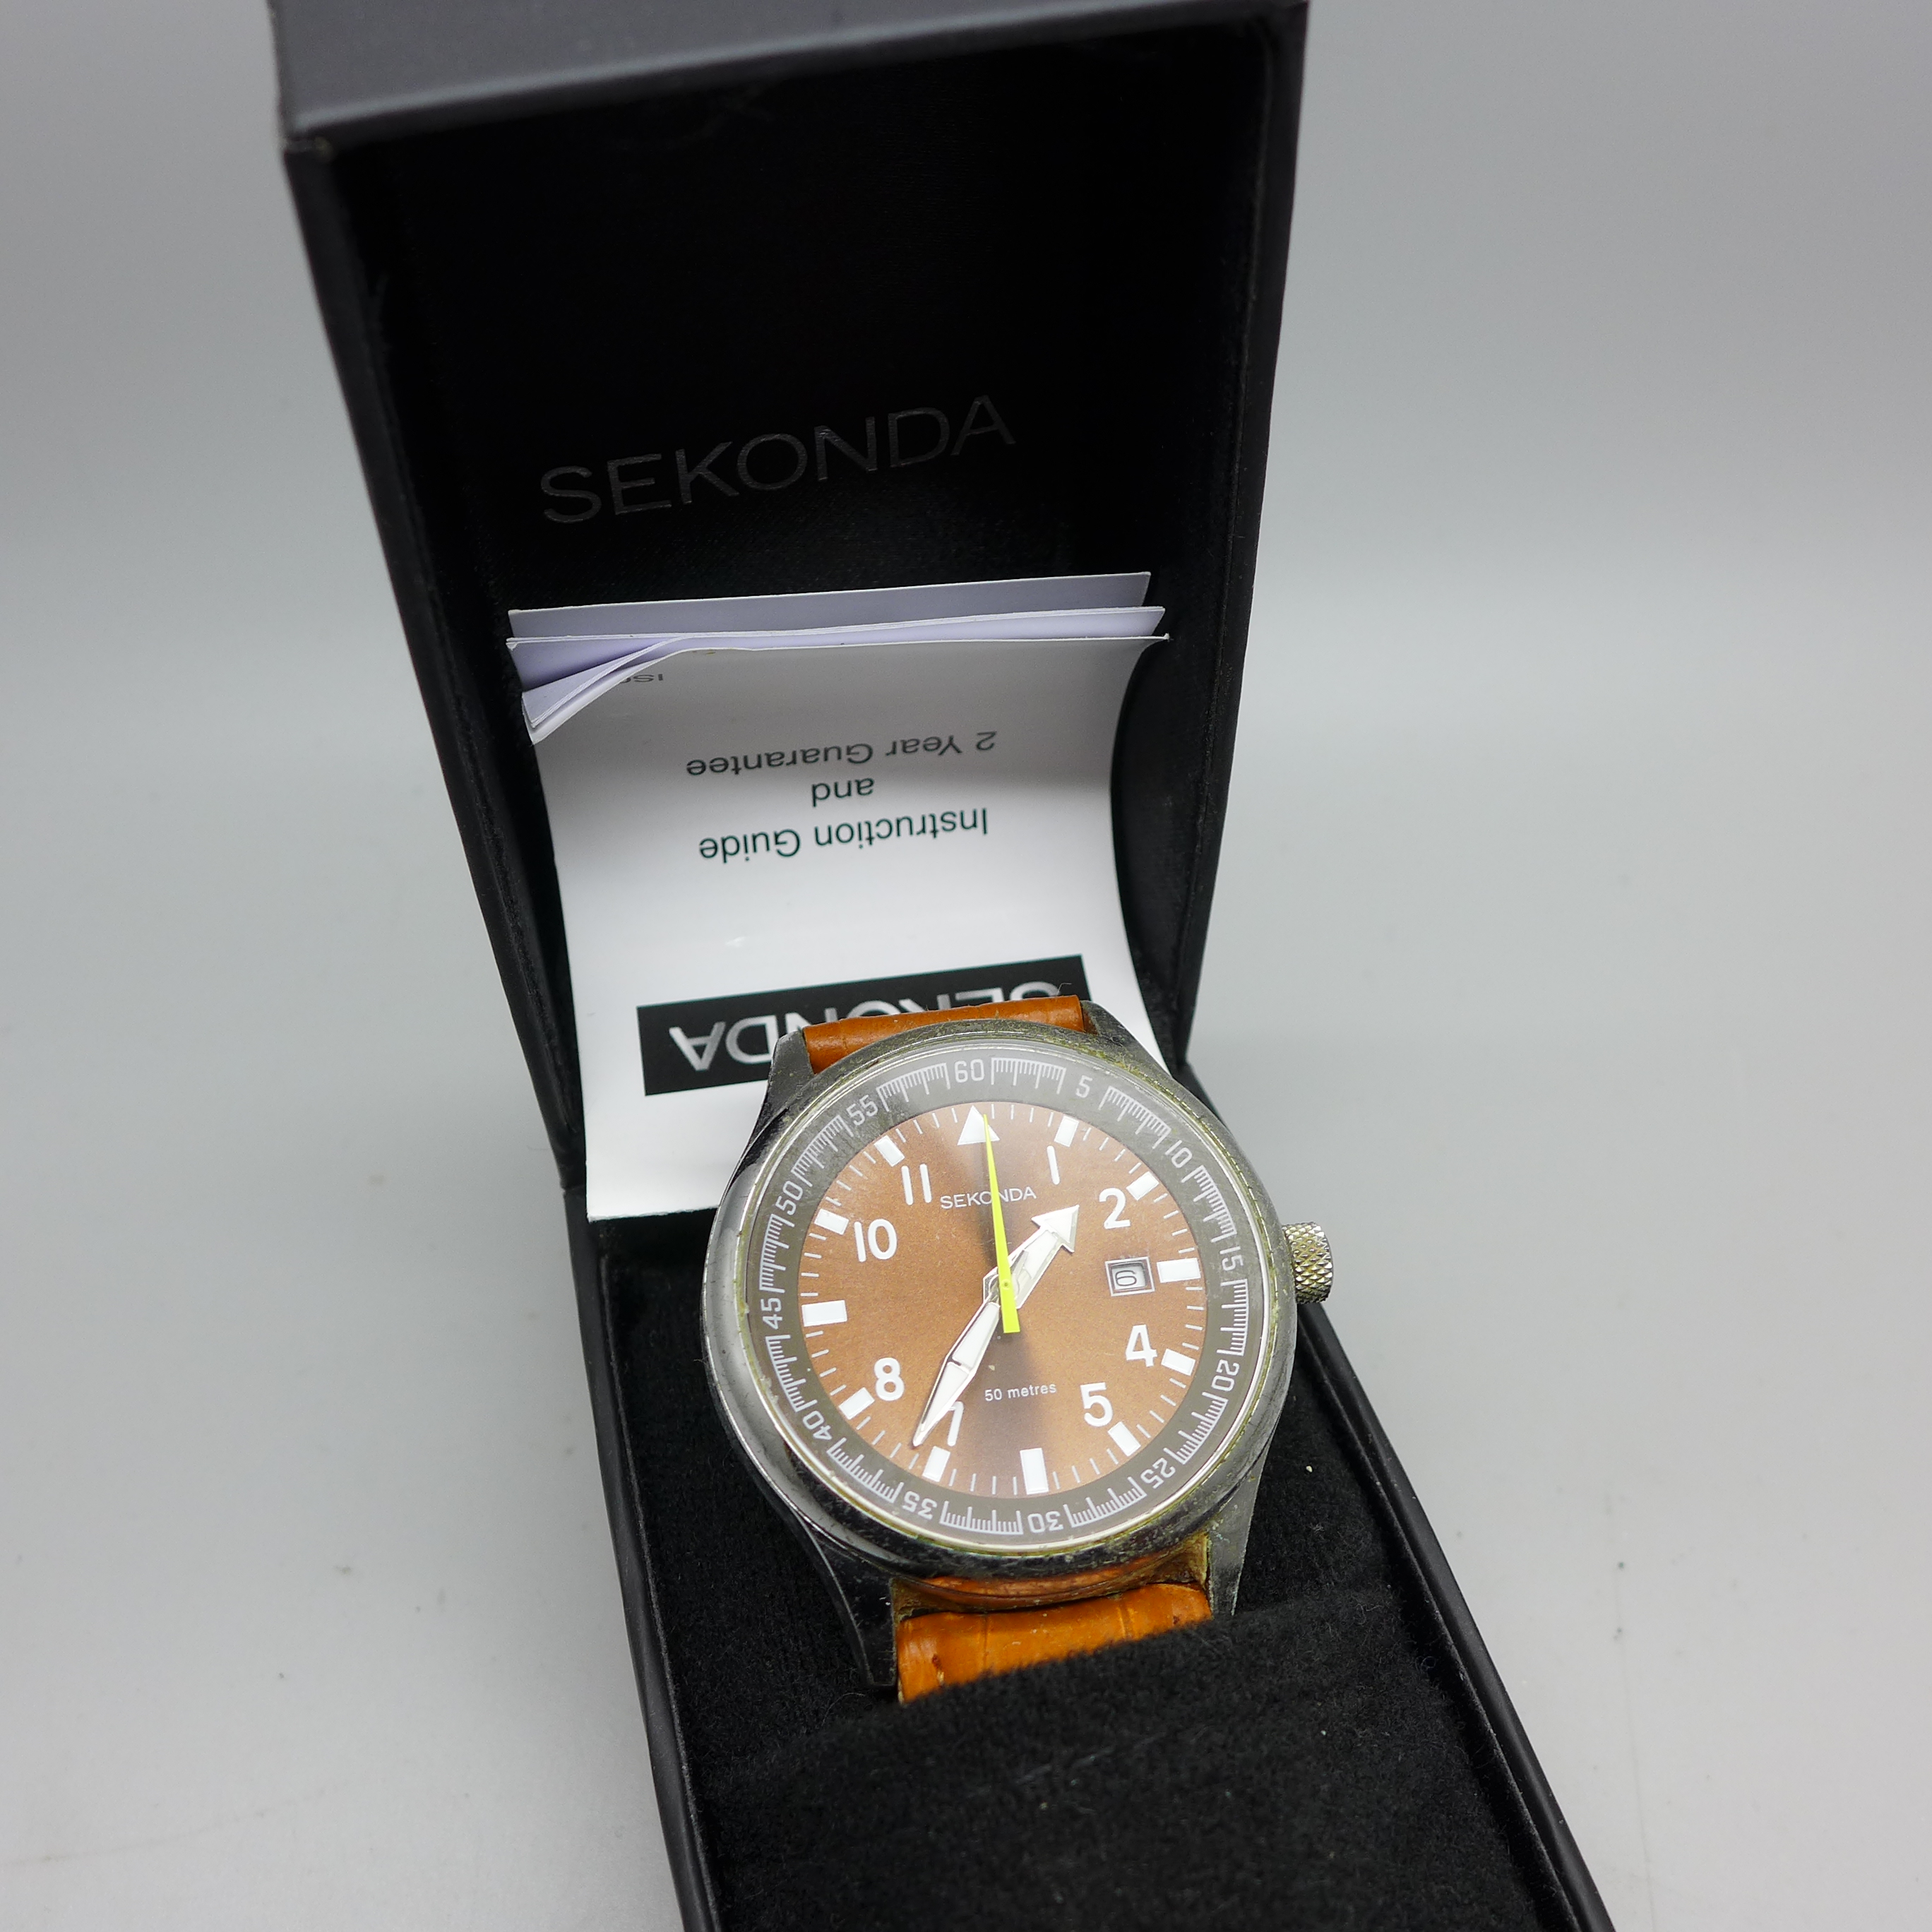 A collection of wristwatches including six Sekonda, Citron, Limit, etc. - Image 5 of 5